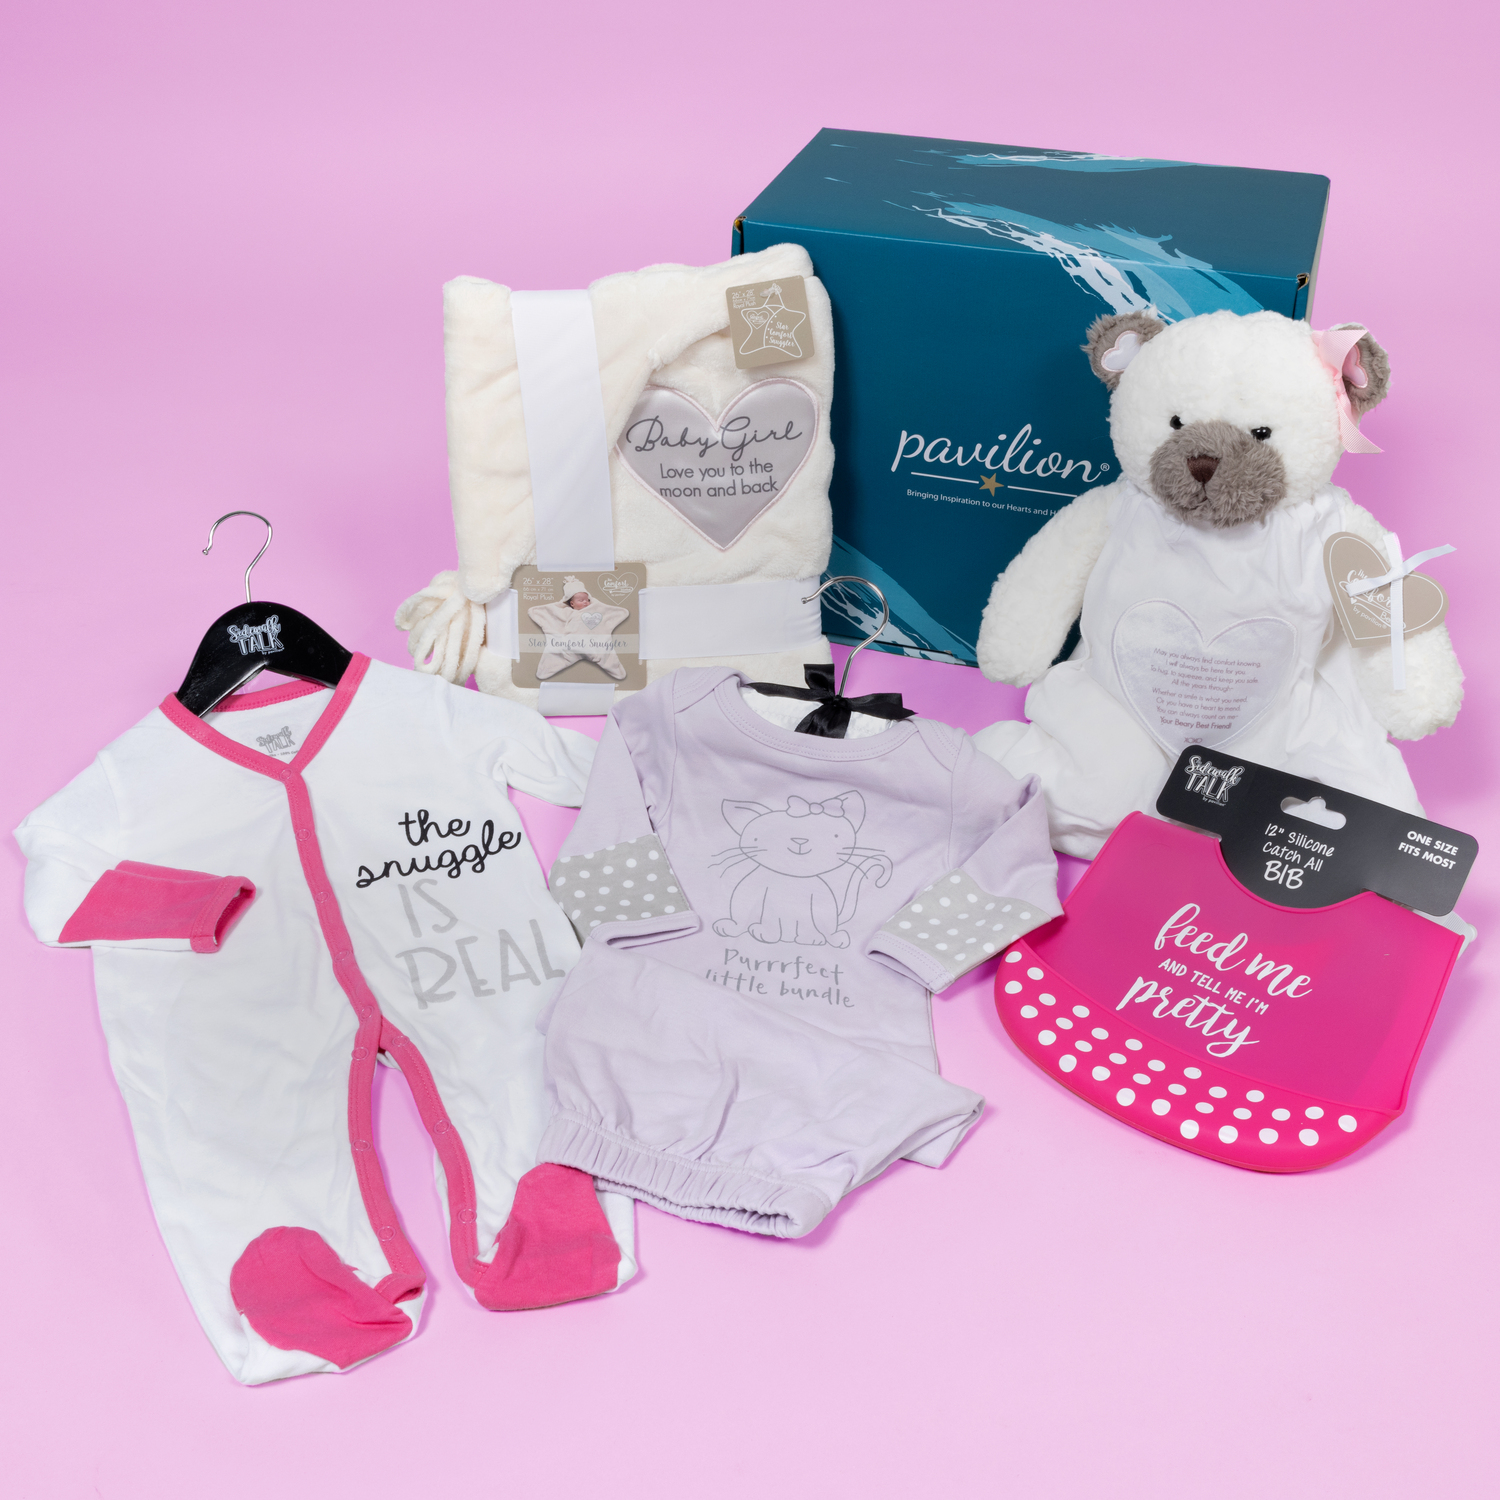 Baby Girl Gift Box by Packaged With Positivity - Baby Girl Gift Box - $120.00 Value